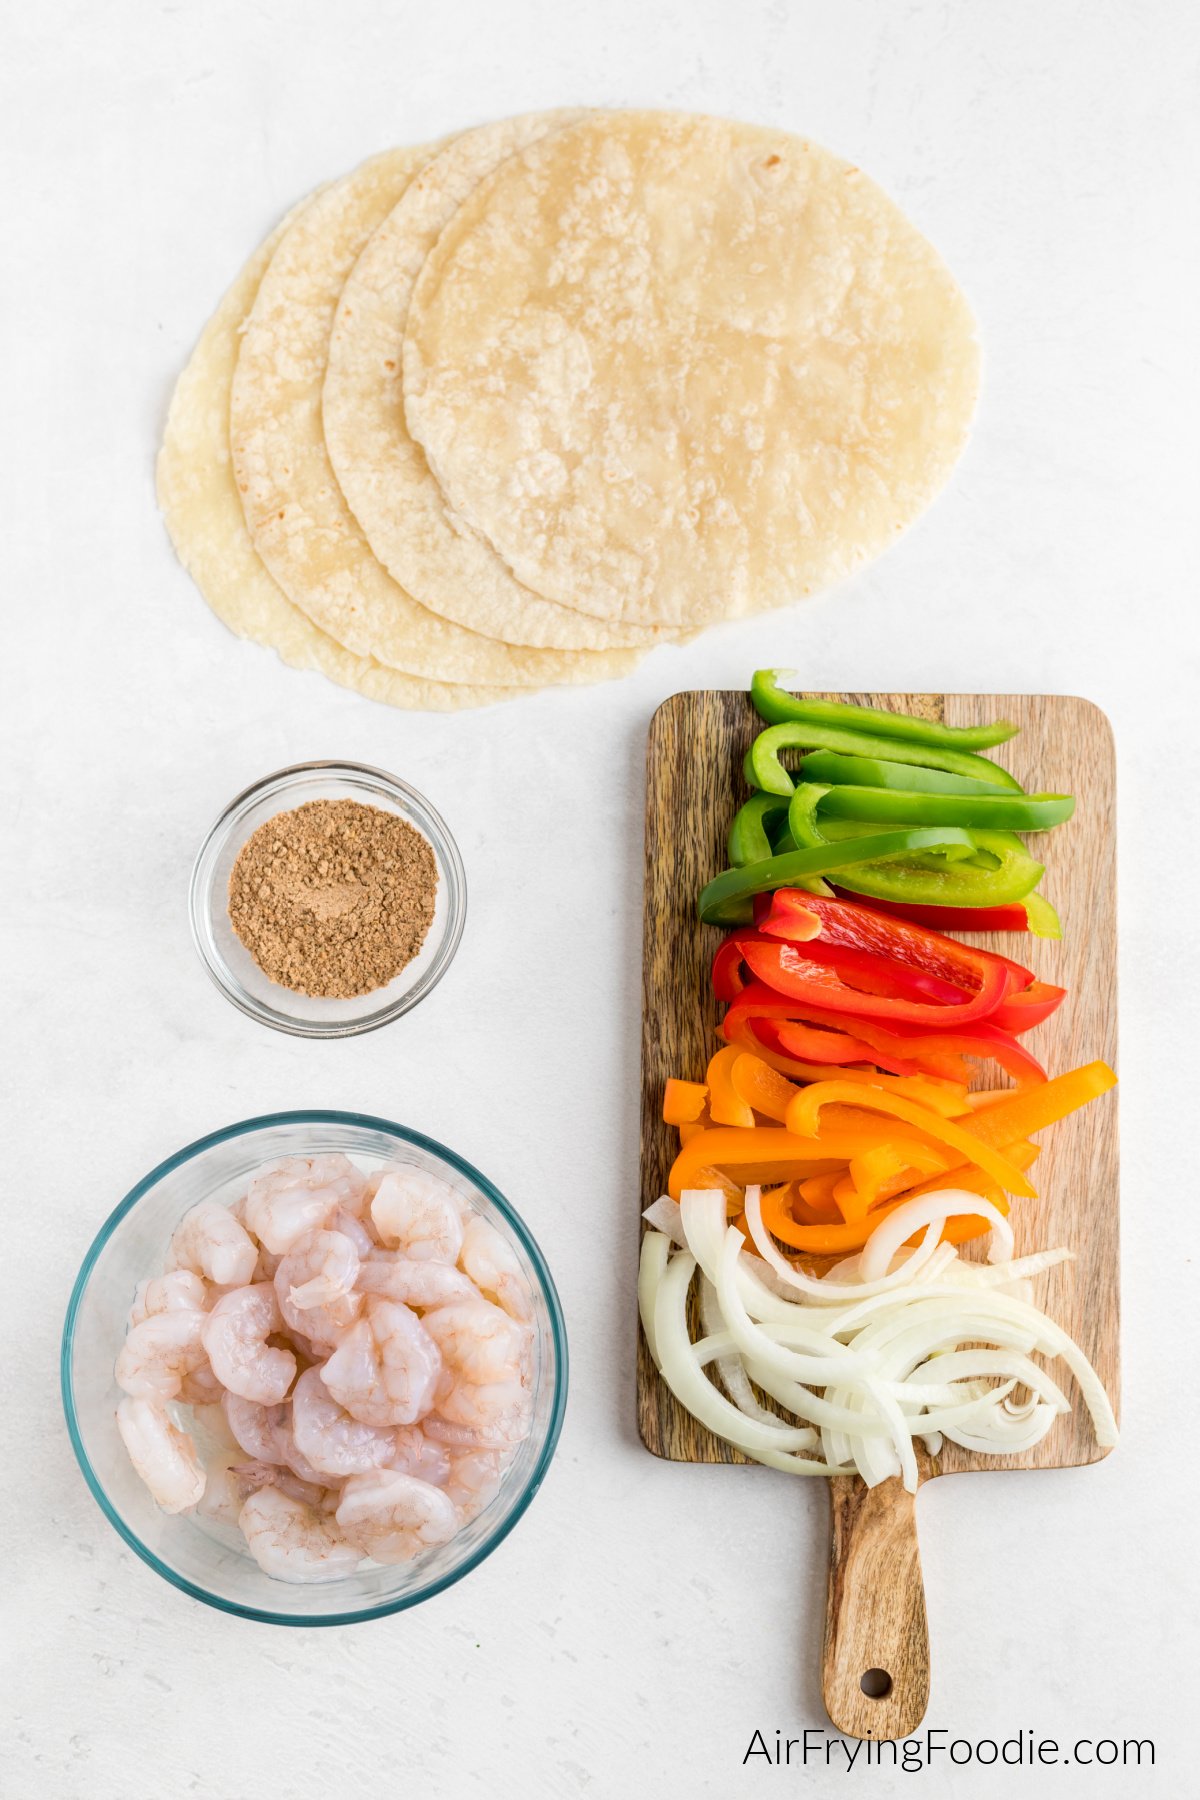 Shrimp, sliced onion and bell peppers on a board, seasoning, and tortillas on a table ready to be prepared.